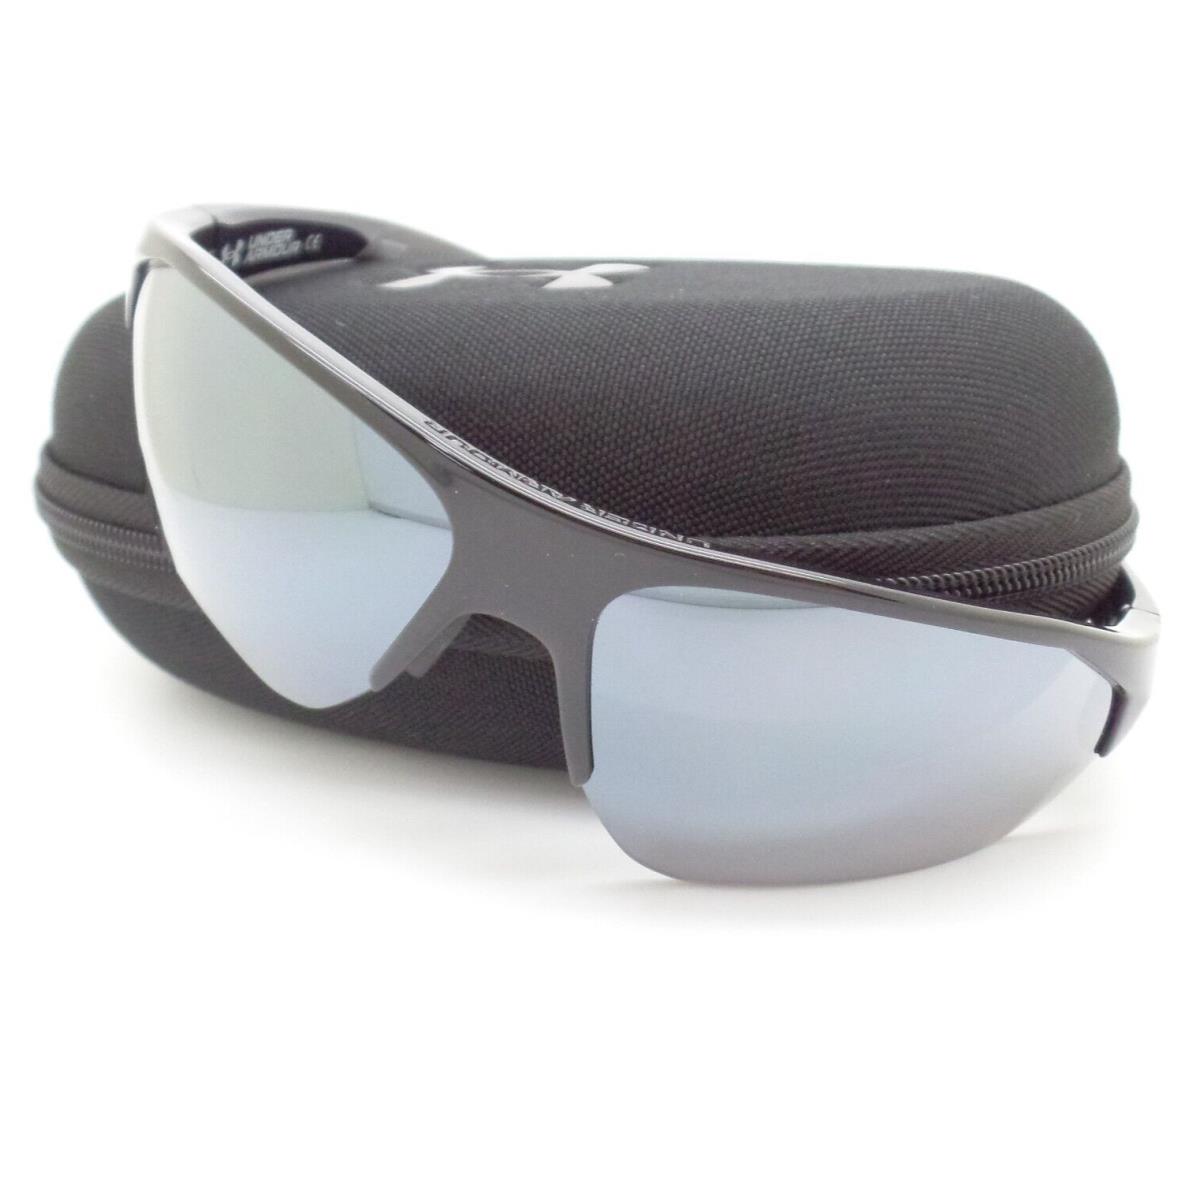 Under Armour Playmaker 0001 GS 807QI Gloss Black Silver Sunglasses - Frame: Gloss Black, Lens: Silver on Grey